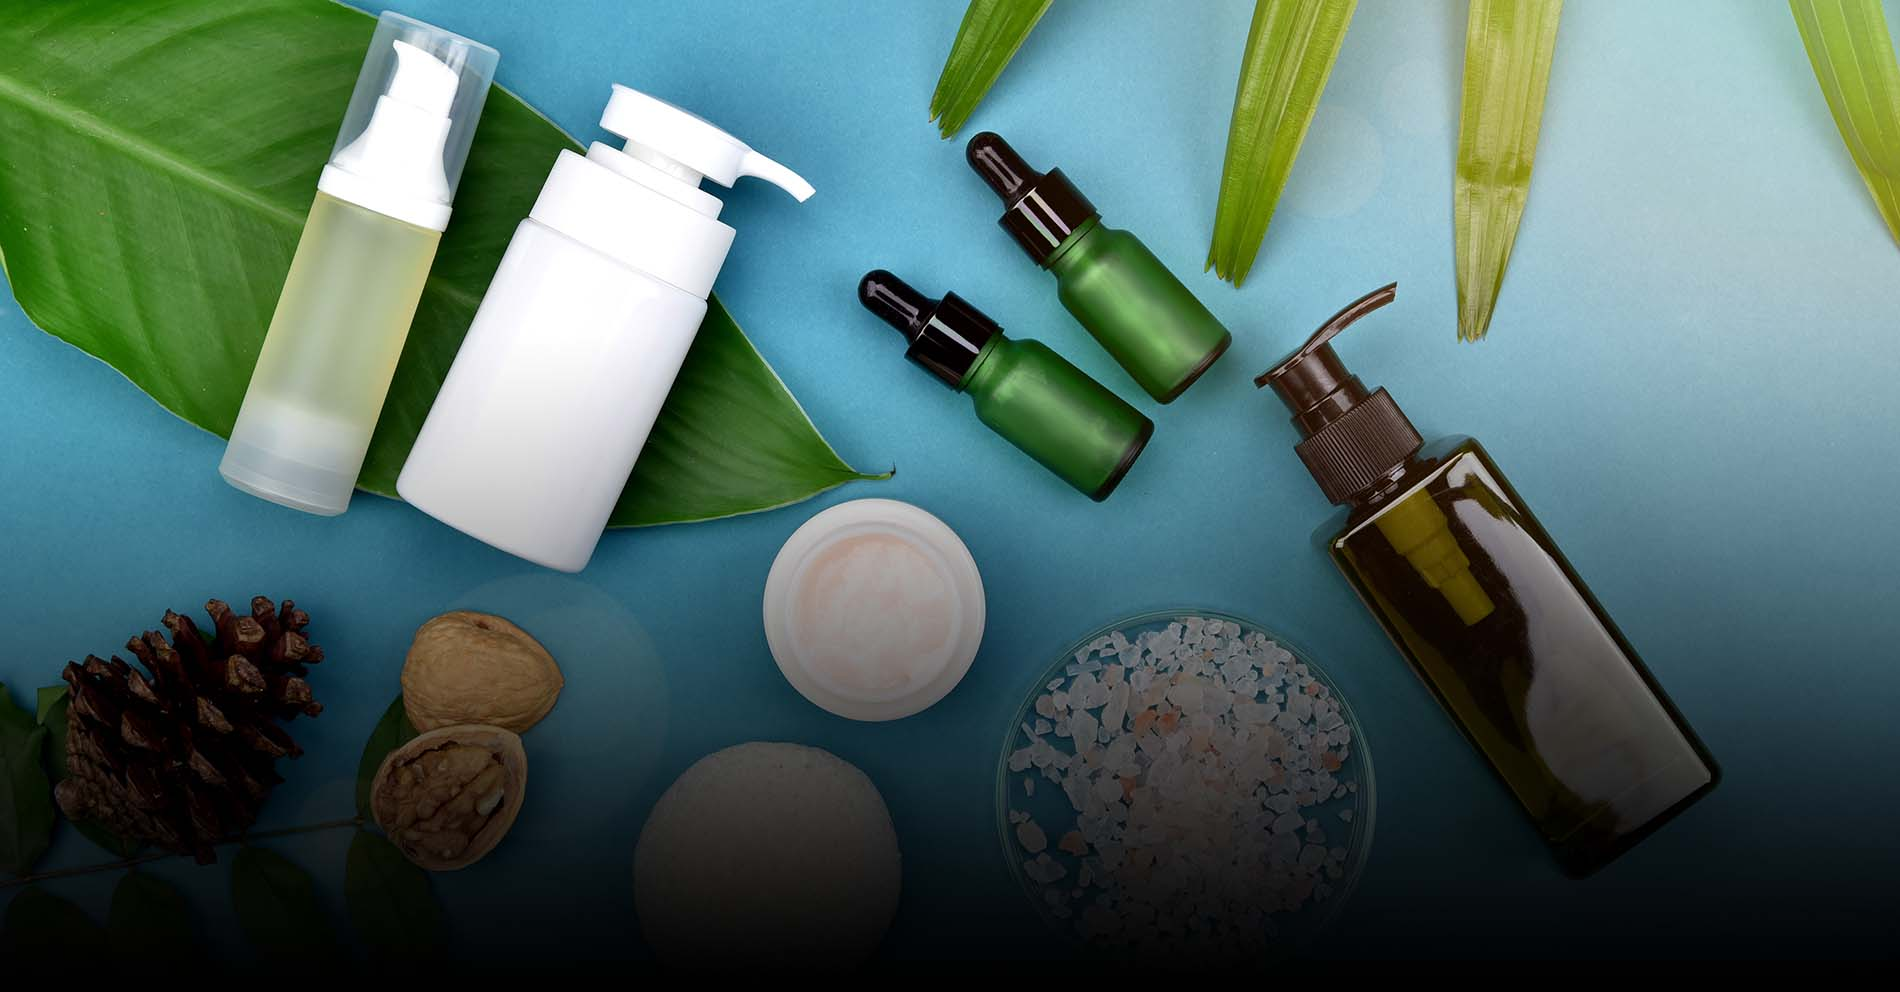 Natural (Ayurveda + Herbal) Personal Care Products Market'